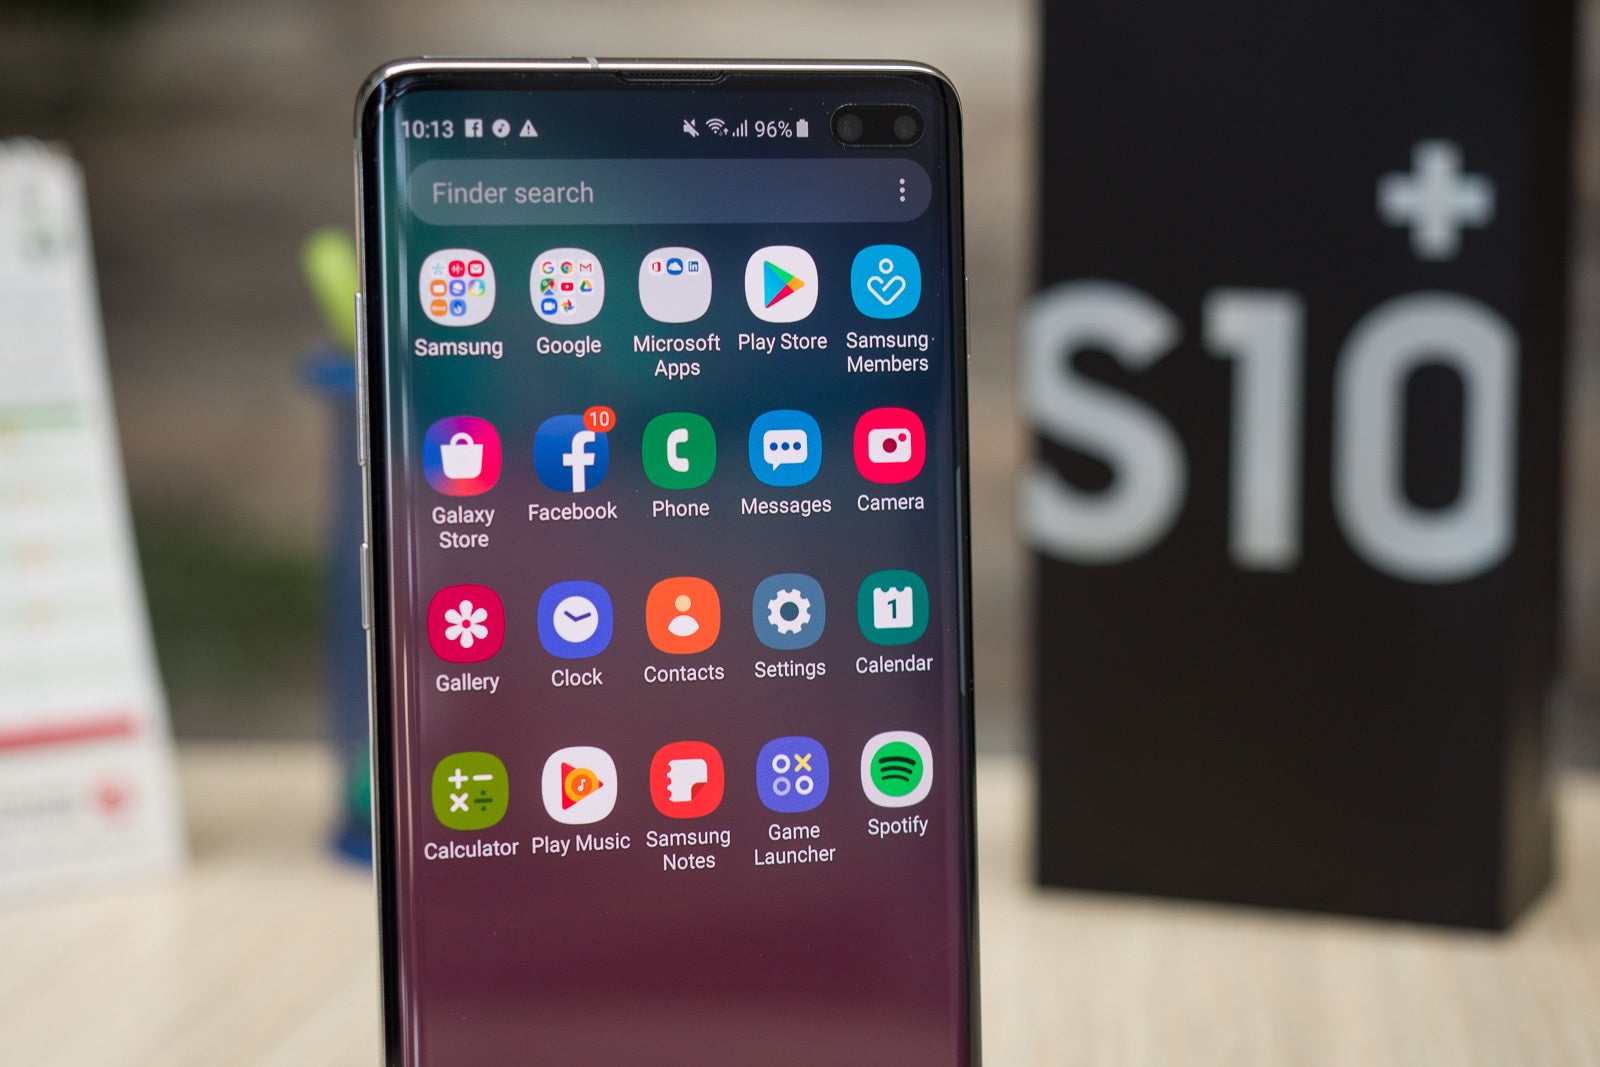 The Samsung Galaxy S10+ seems to be the most popular model - The Galaxy S10 is hugely outperforming the Galaxy S9 in yet another market